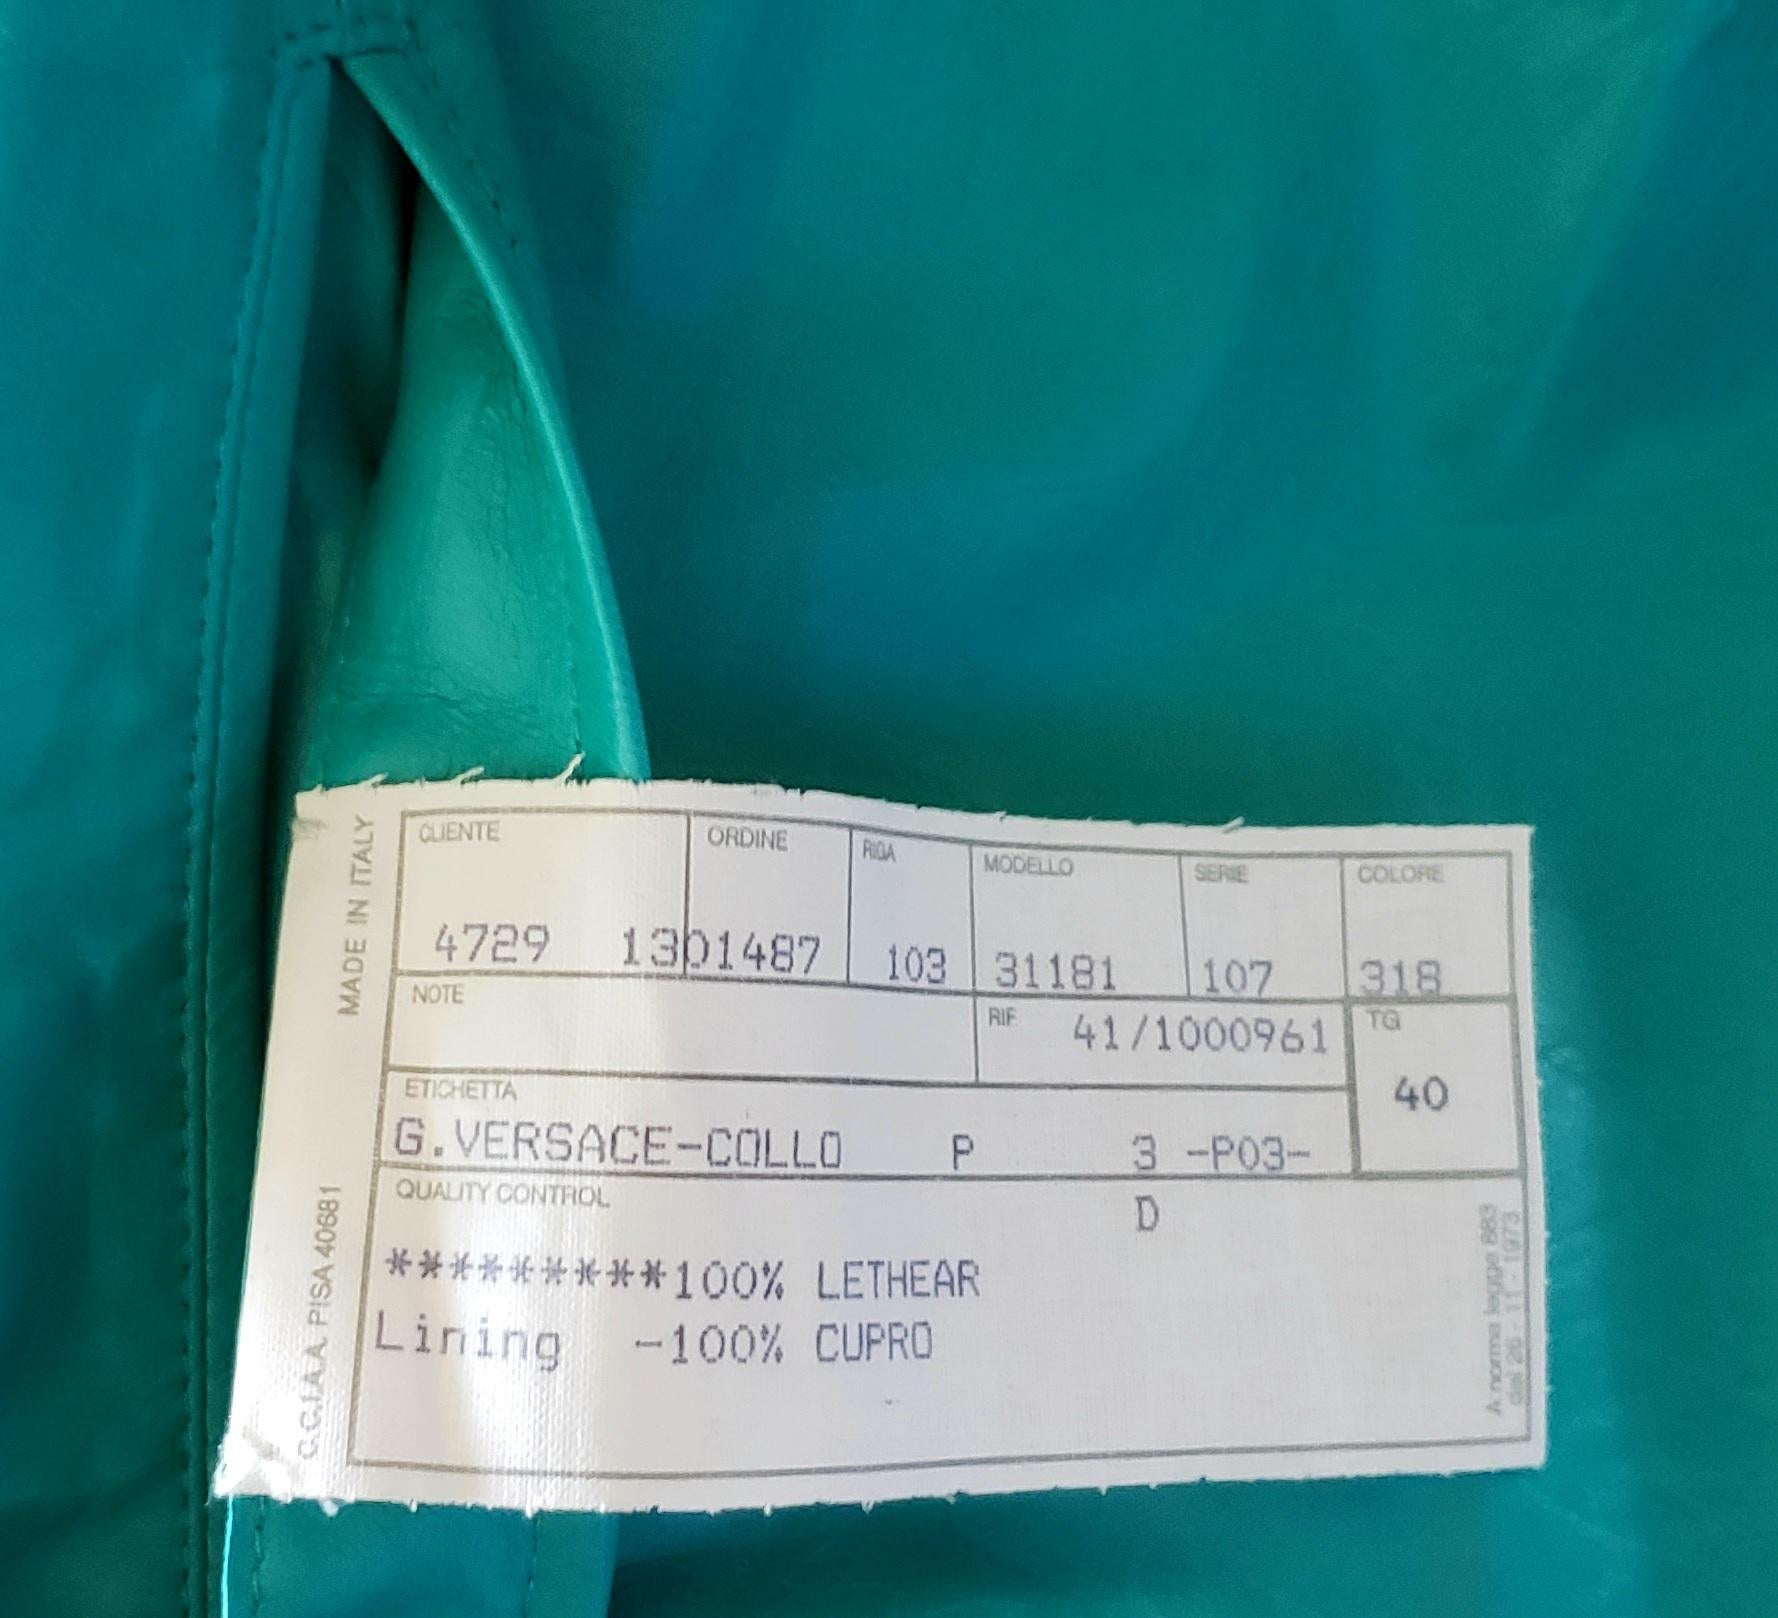 NEW GIANNI VERSACE EMERALD GREEN LEATHER JACKET with RIVETS Sz IT 40 - US 4/6 For Sale 11